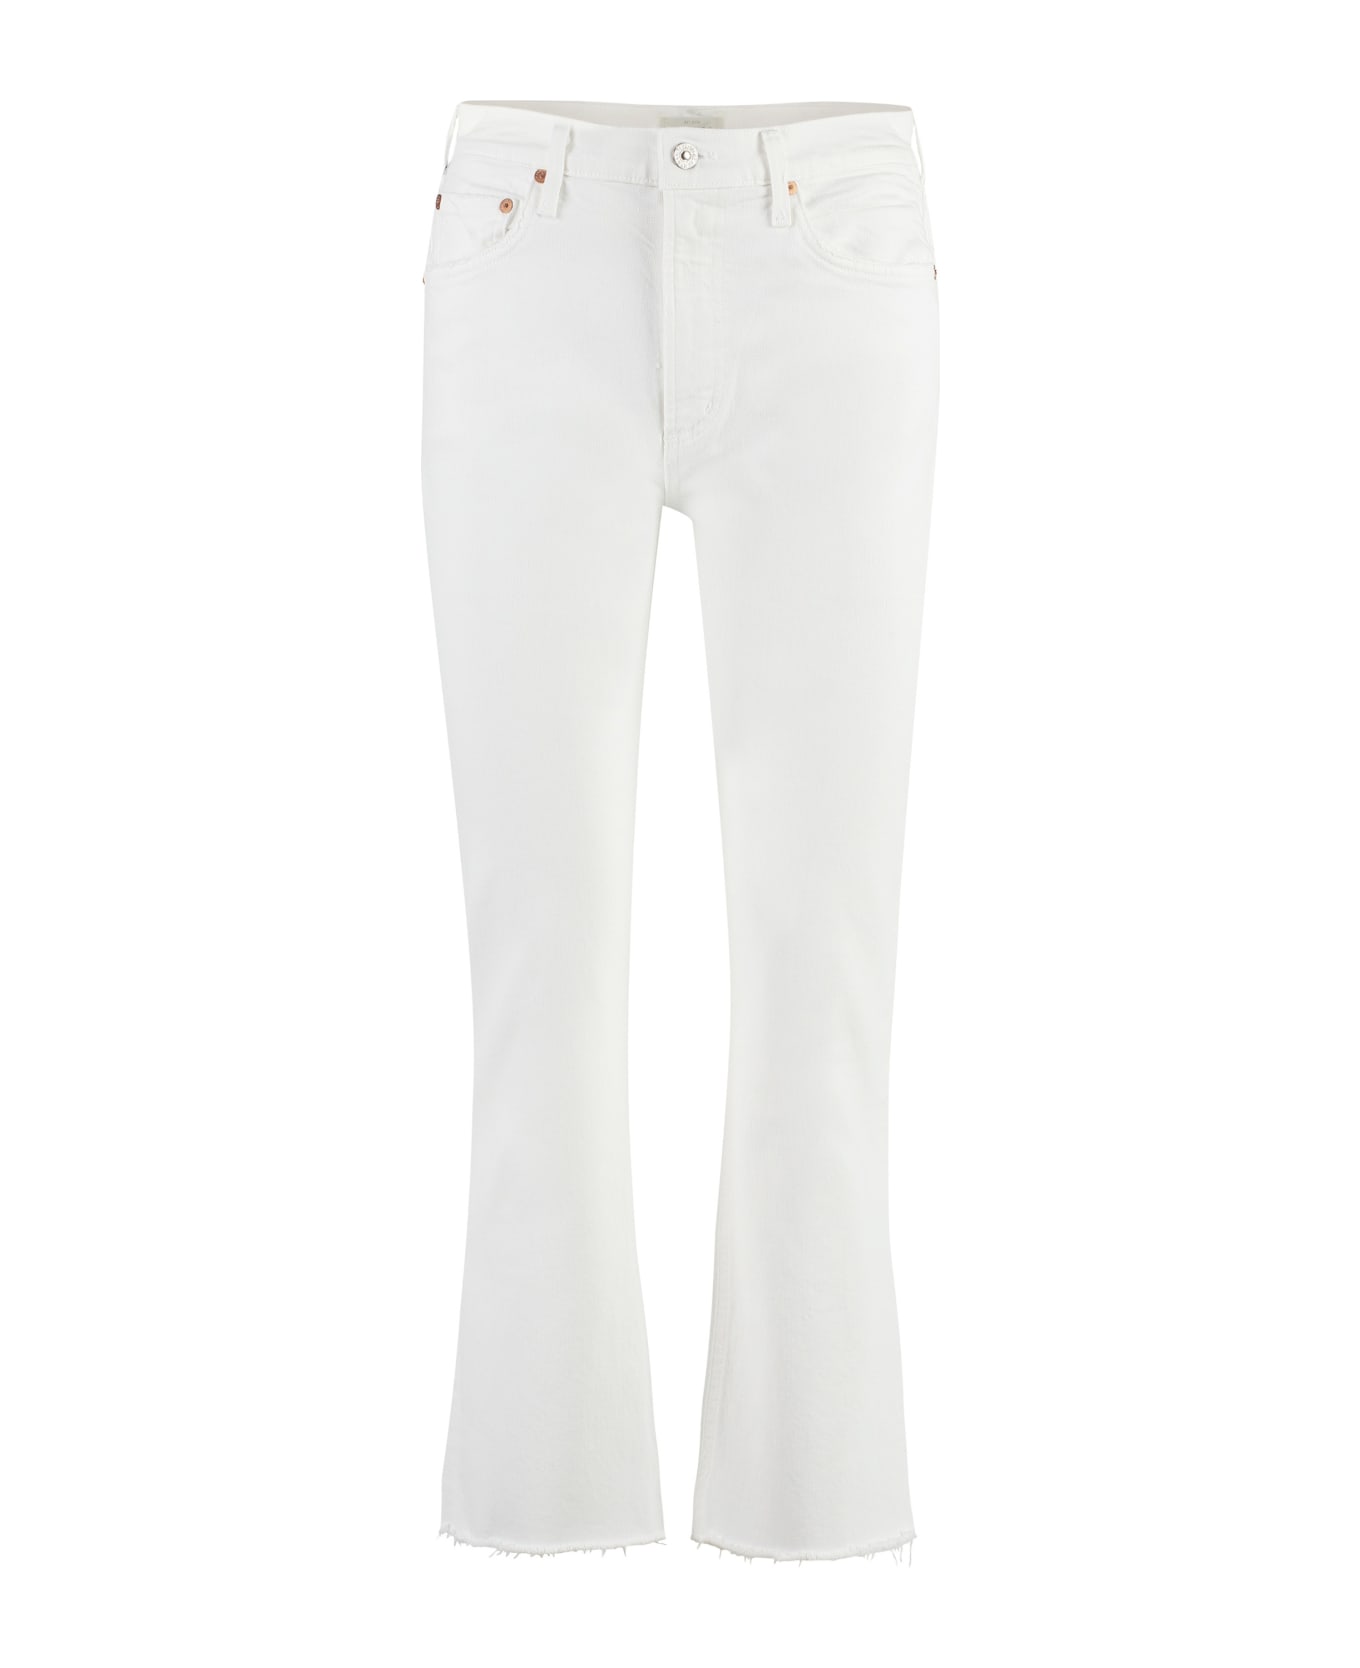 Citizens of Humanity Cropped Jeans - White